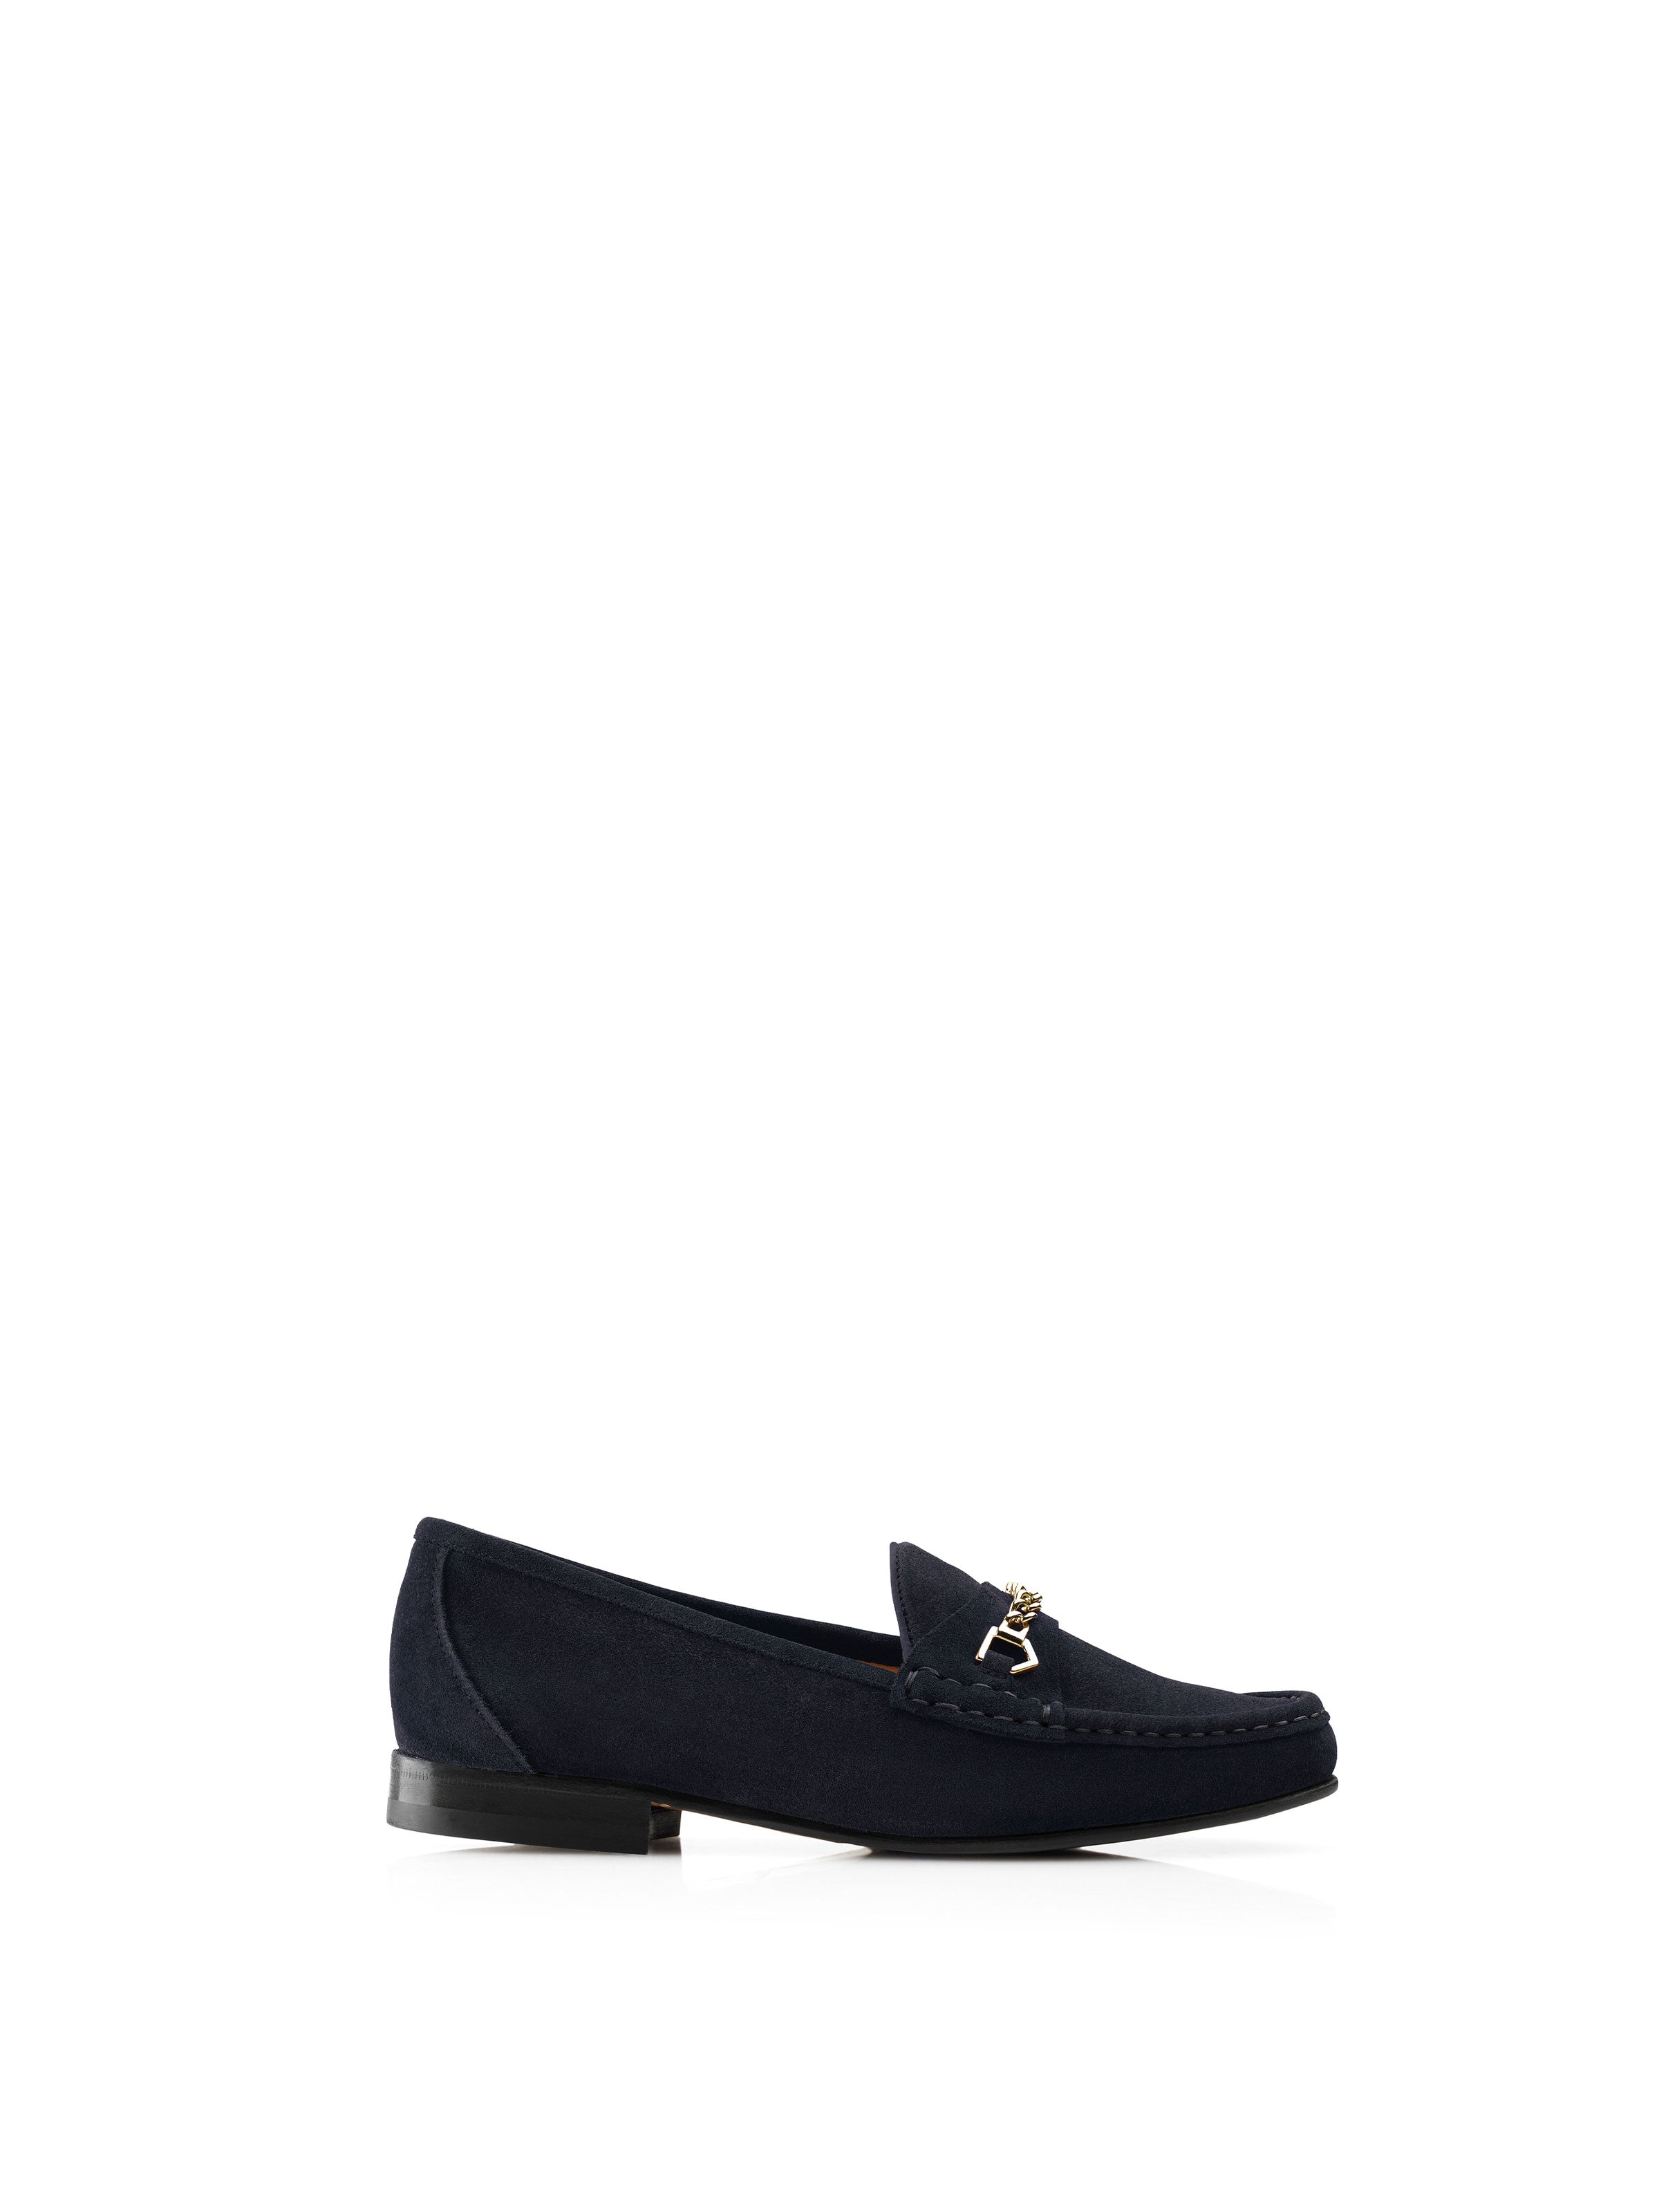 Apsley - Women's Loafer in Navy Blue Suede | Fairfax & Favor